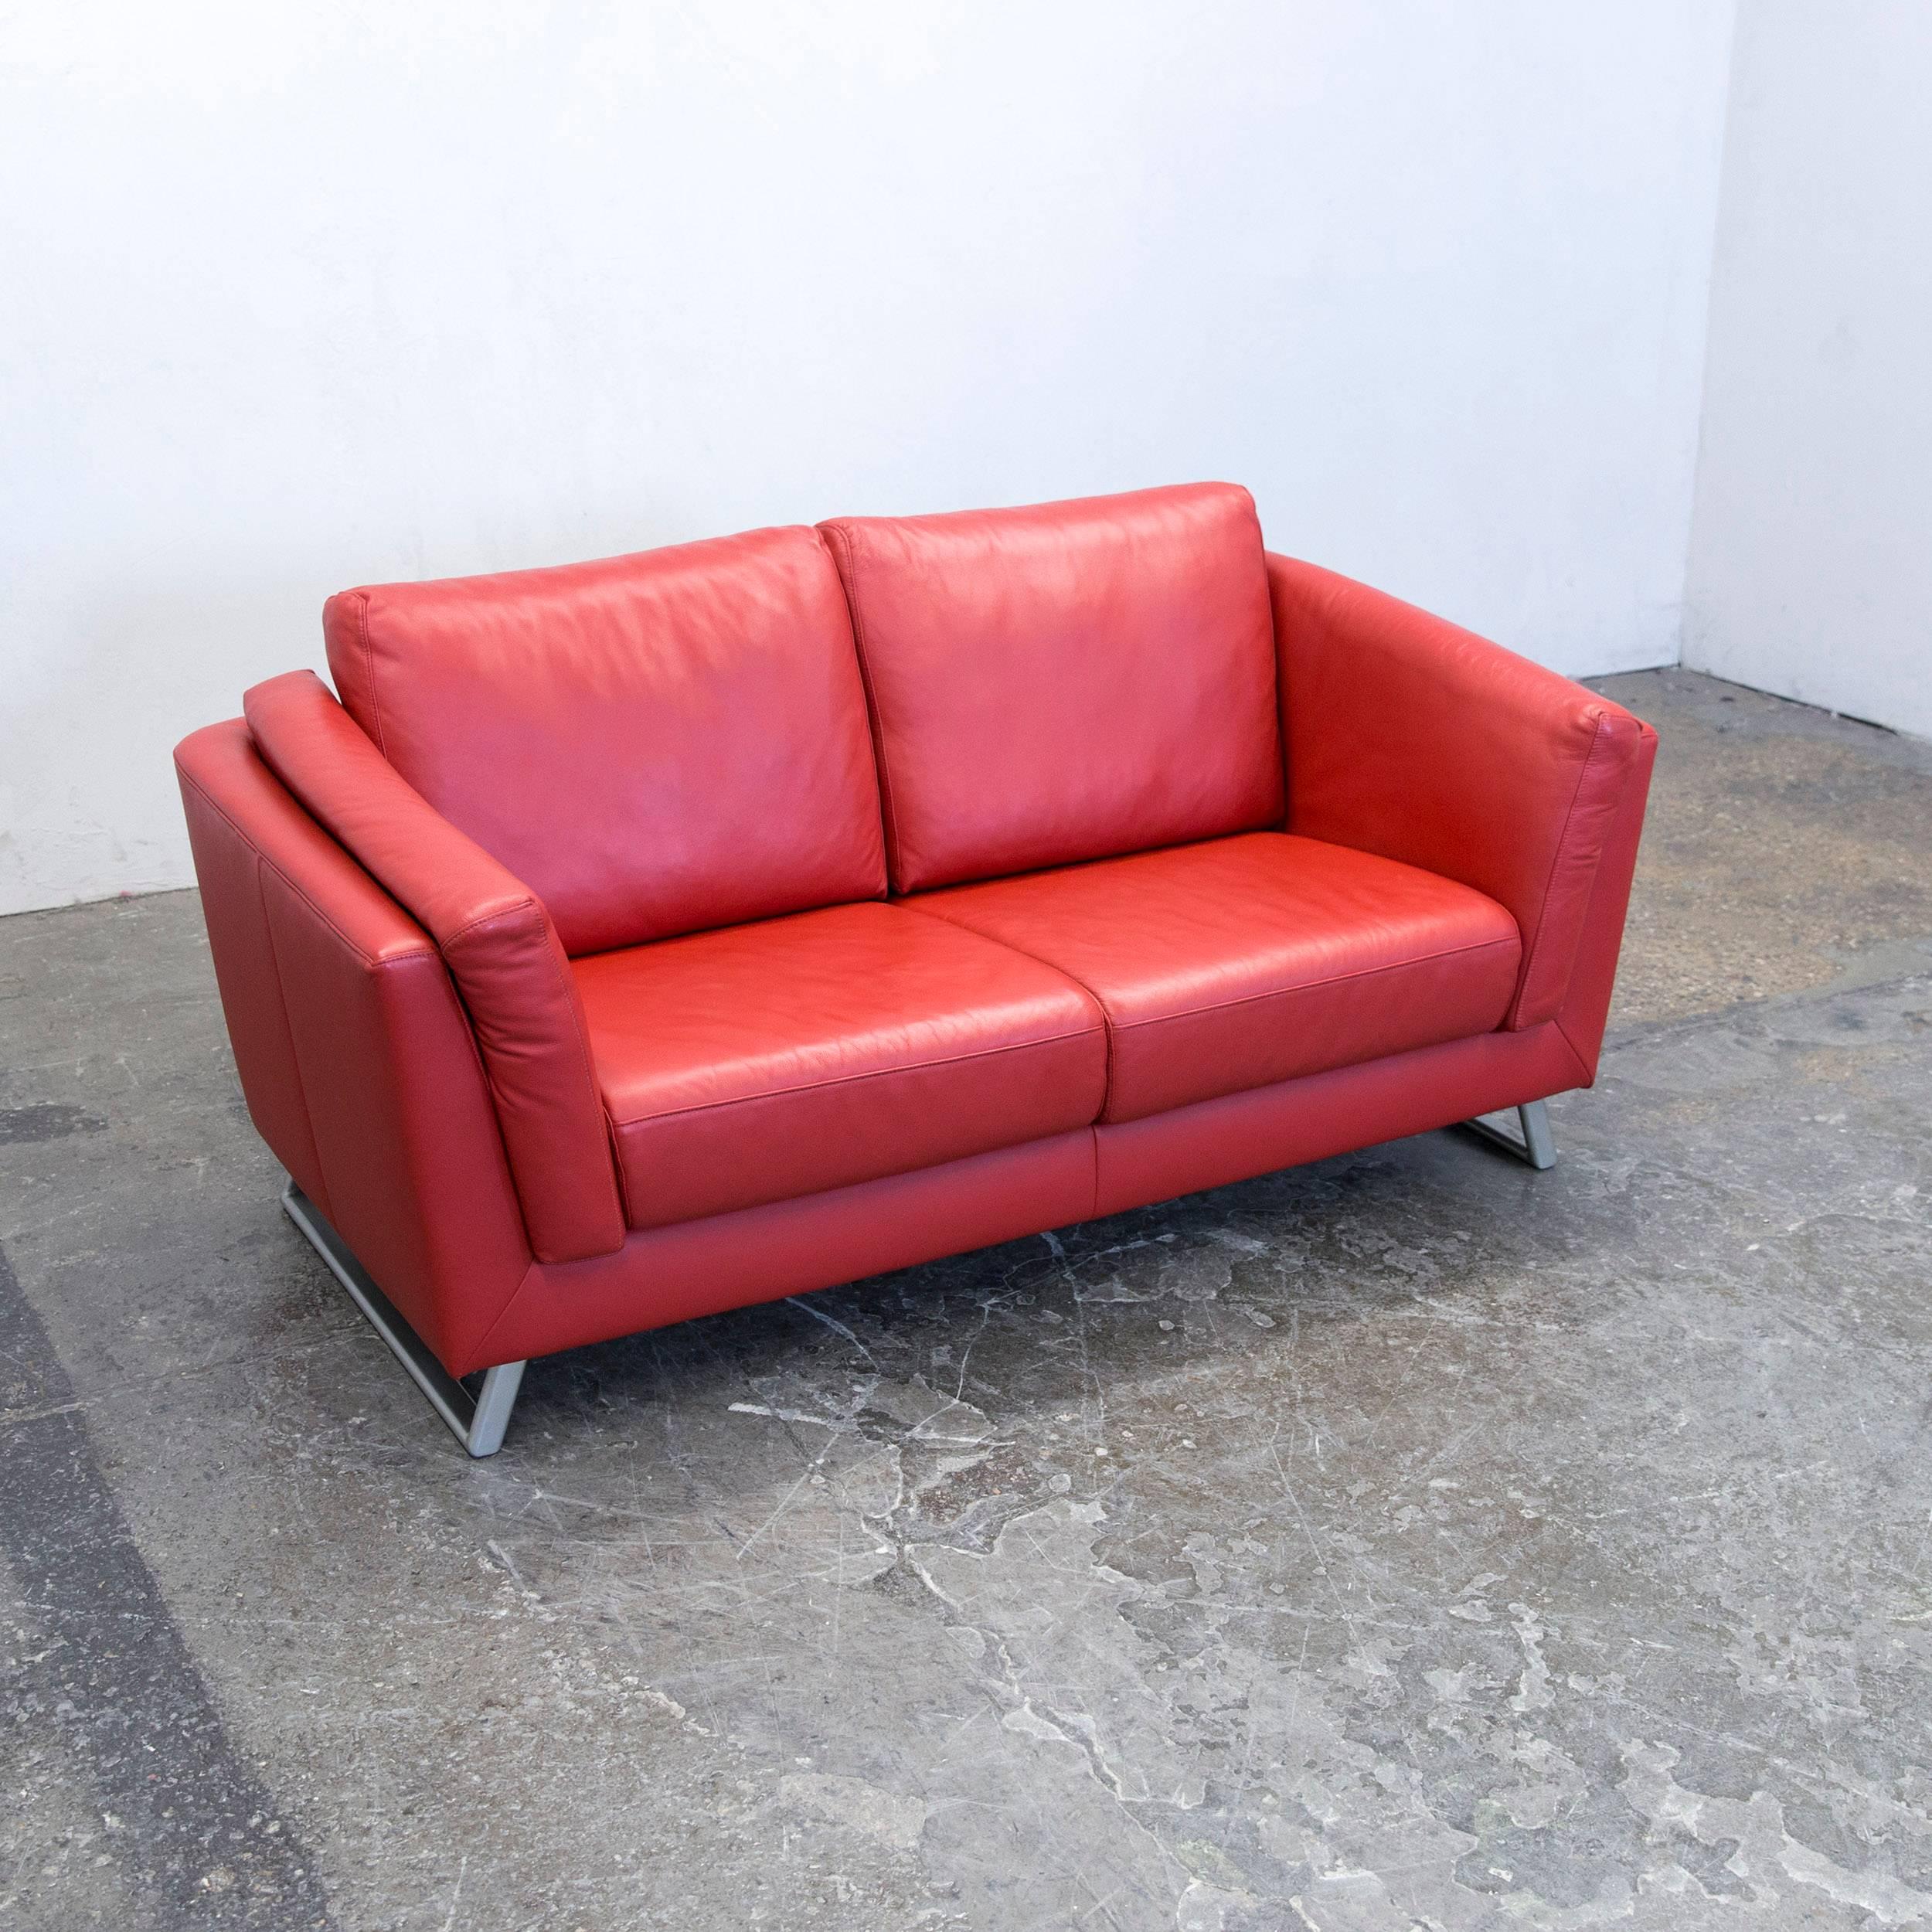 German Designer Sofa Leather Red Two-Seat Couch Modern